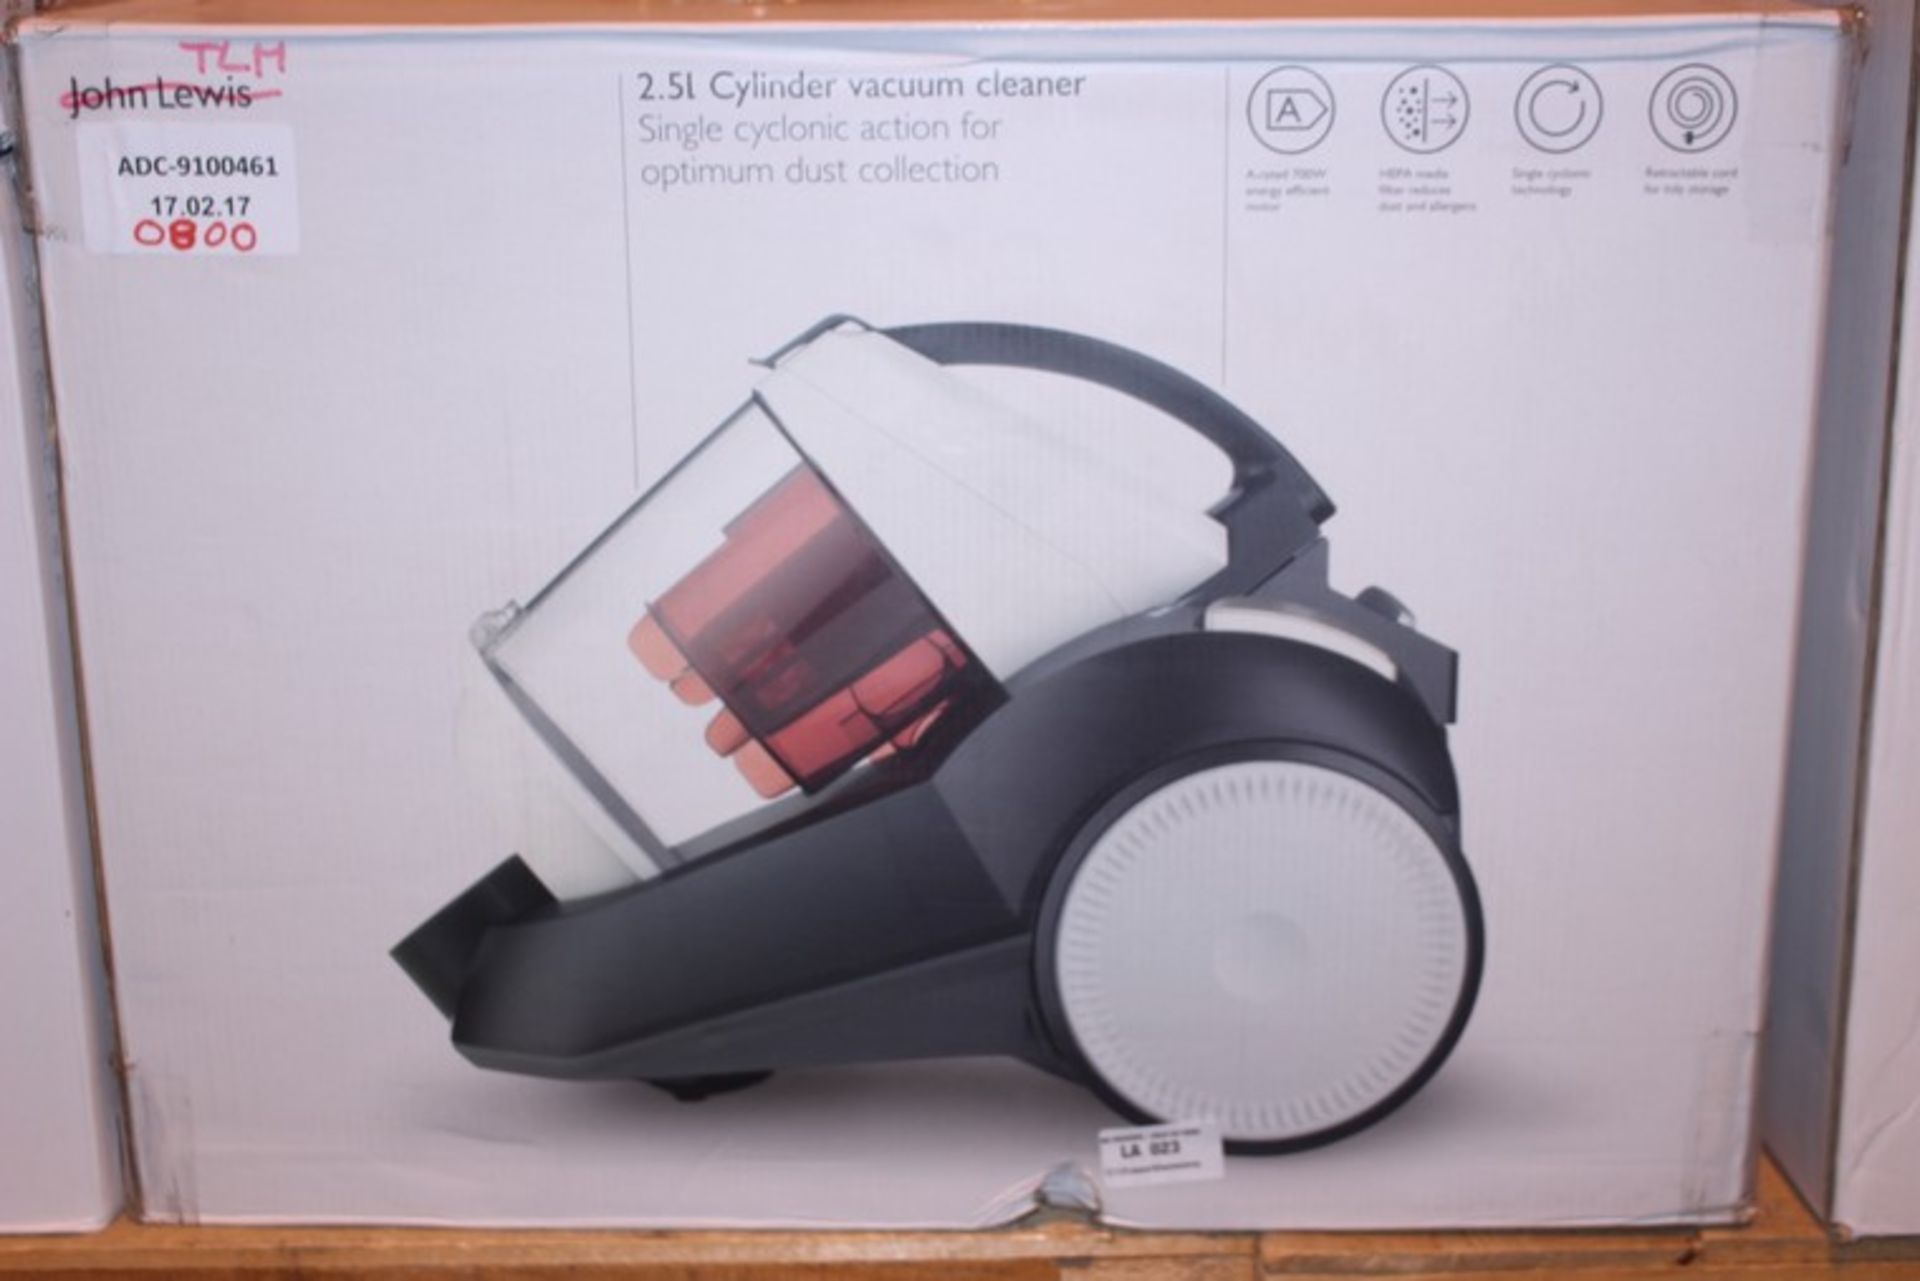 1 x BOXED 2.5L SINGLE CYCLONIC CYLINDER VACUUM CLEANER RRP £80 (17.2.17) *PLEASE NOTE THAT THE BID